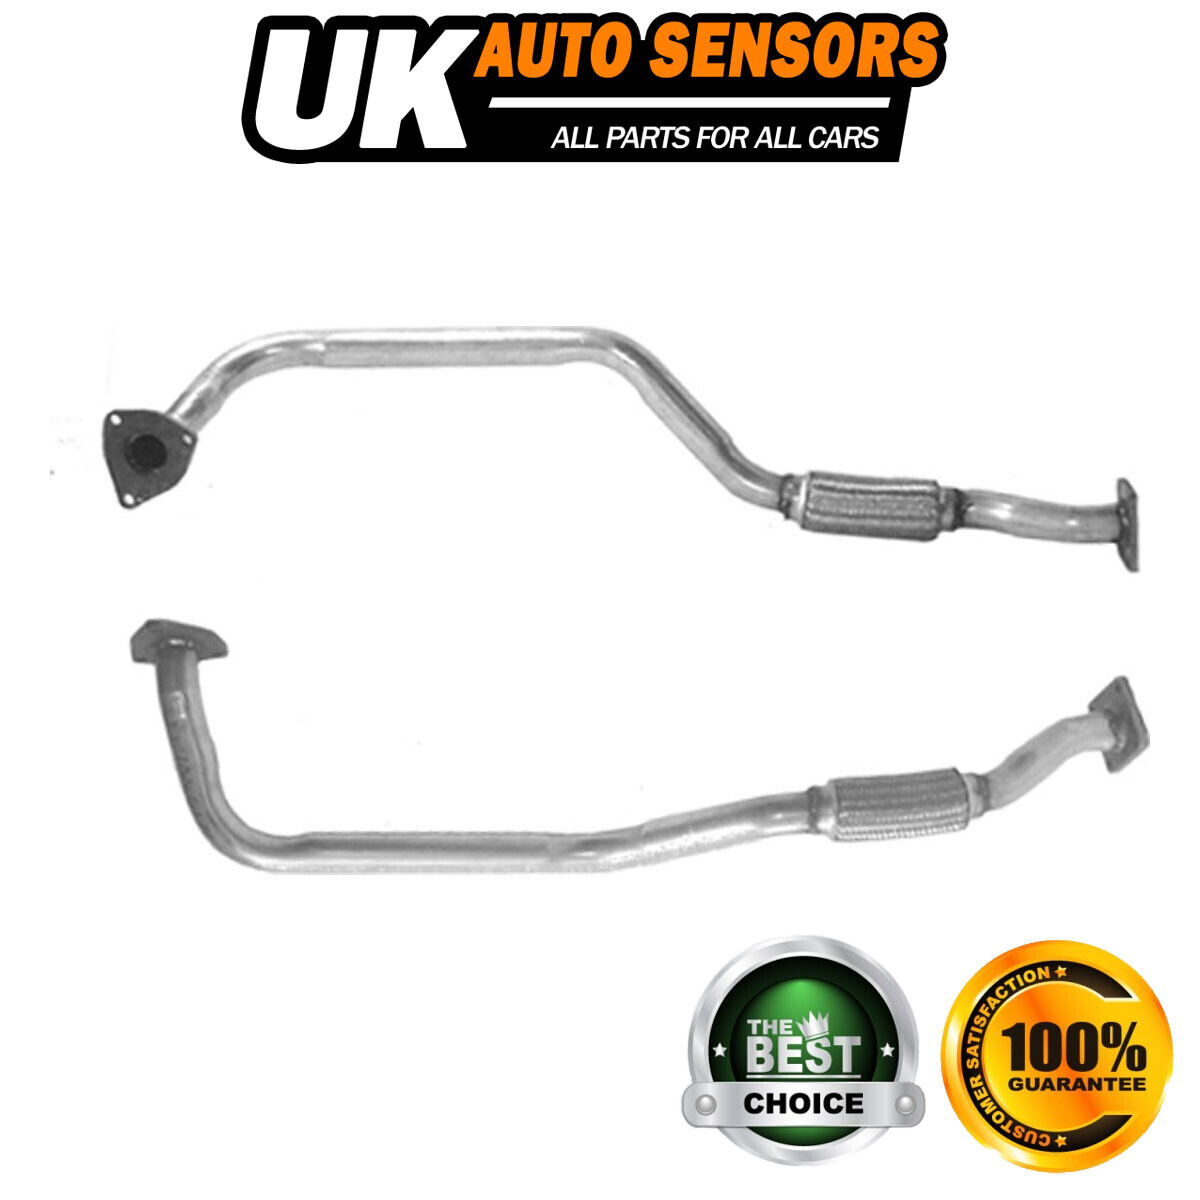 Fits Daewoo Nexia 1997-1997 1.5 Exhaust Pipe Euro 2 Front AST #1 96184261